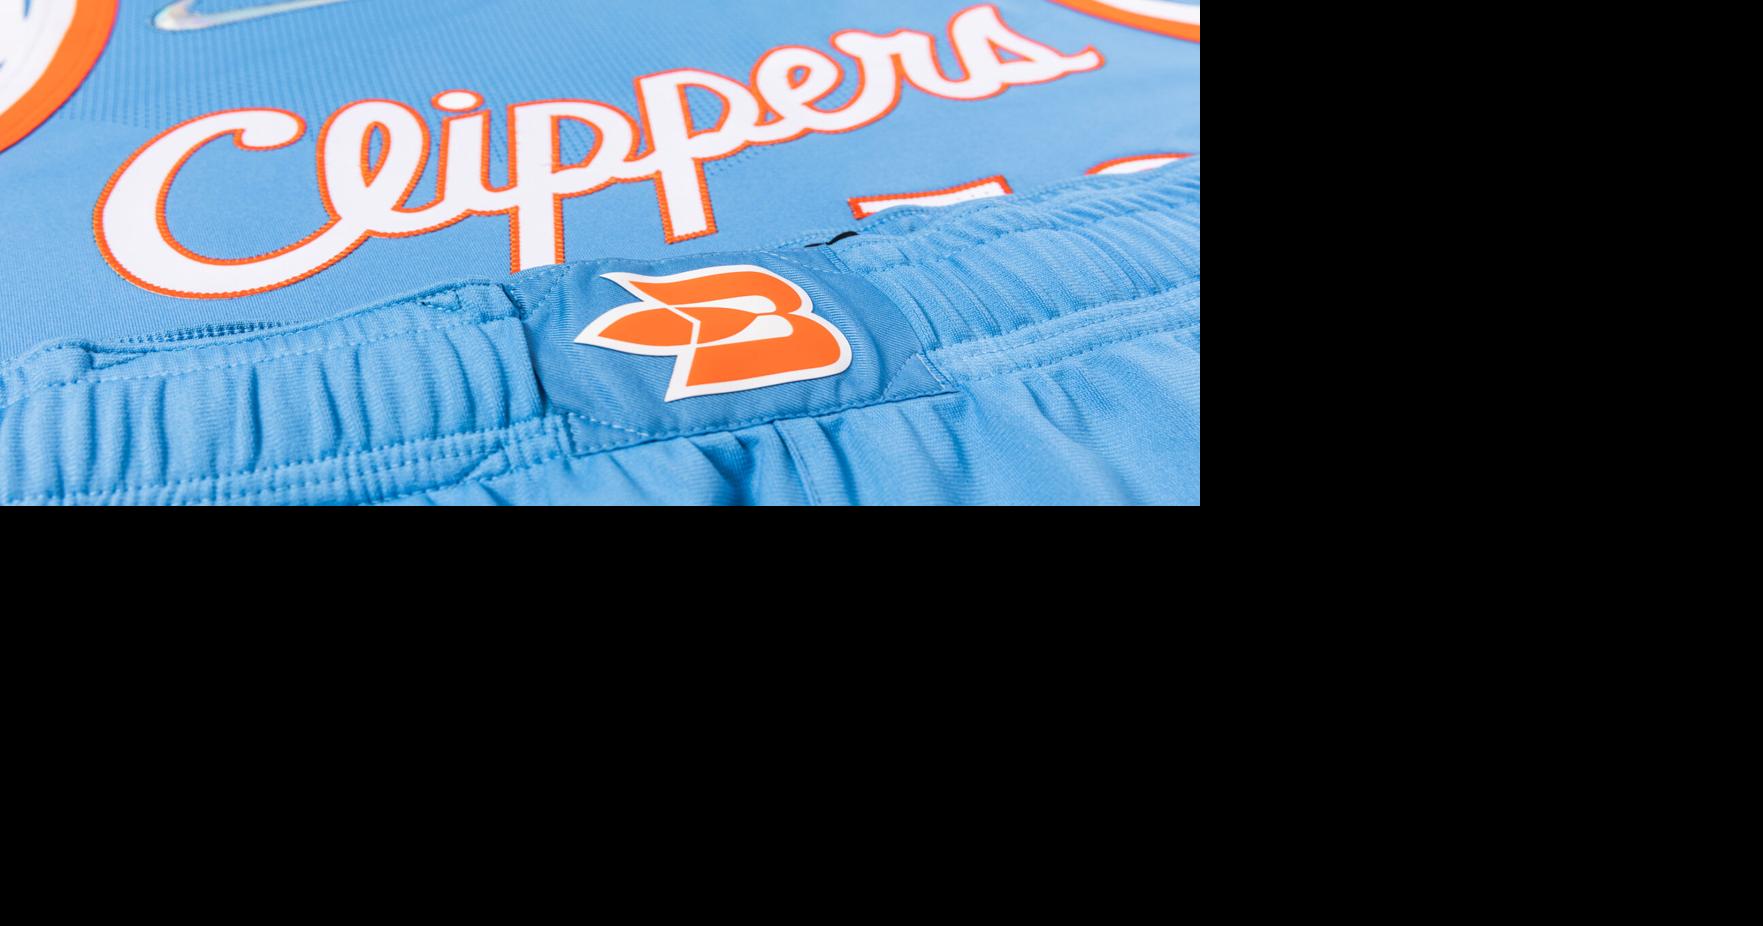 Griffs to Wear Buffalo Braves Themed Uniforms - Canisius